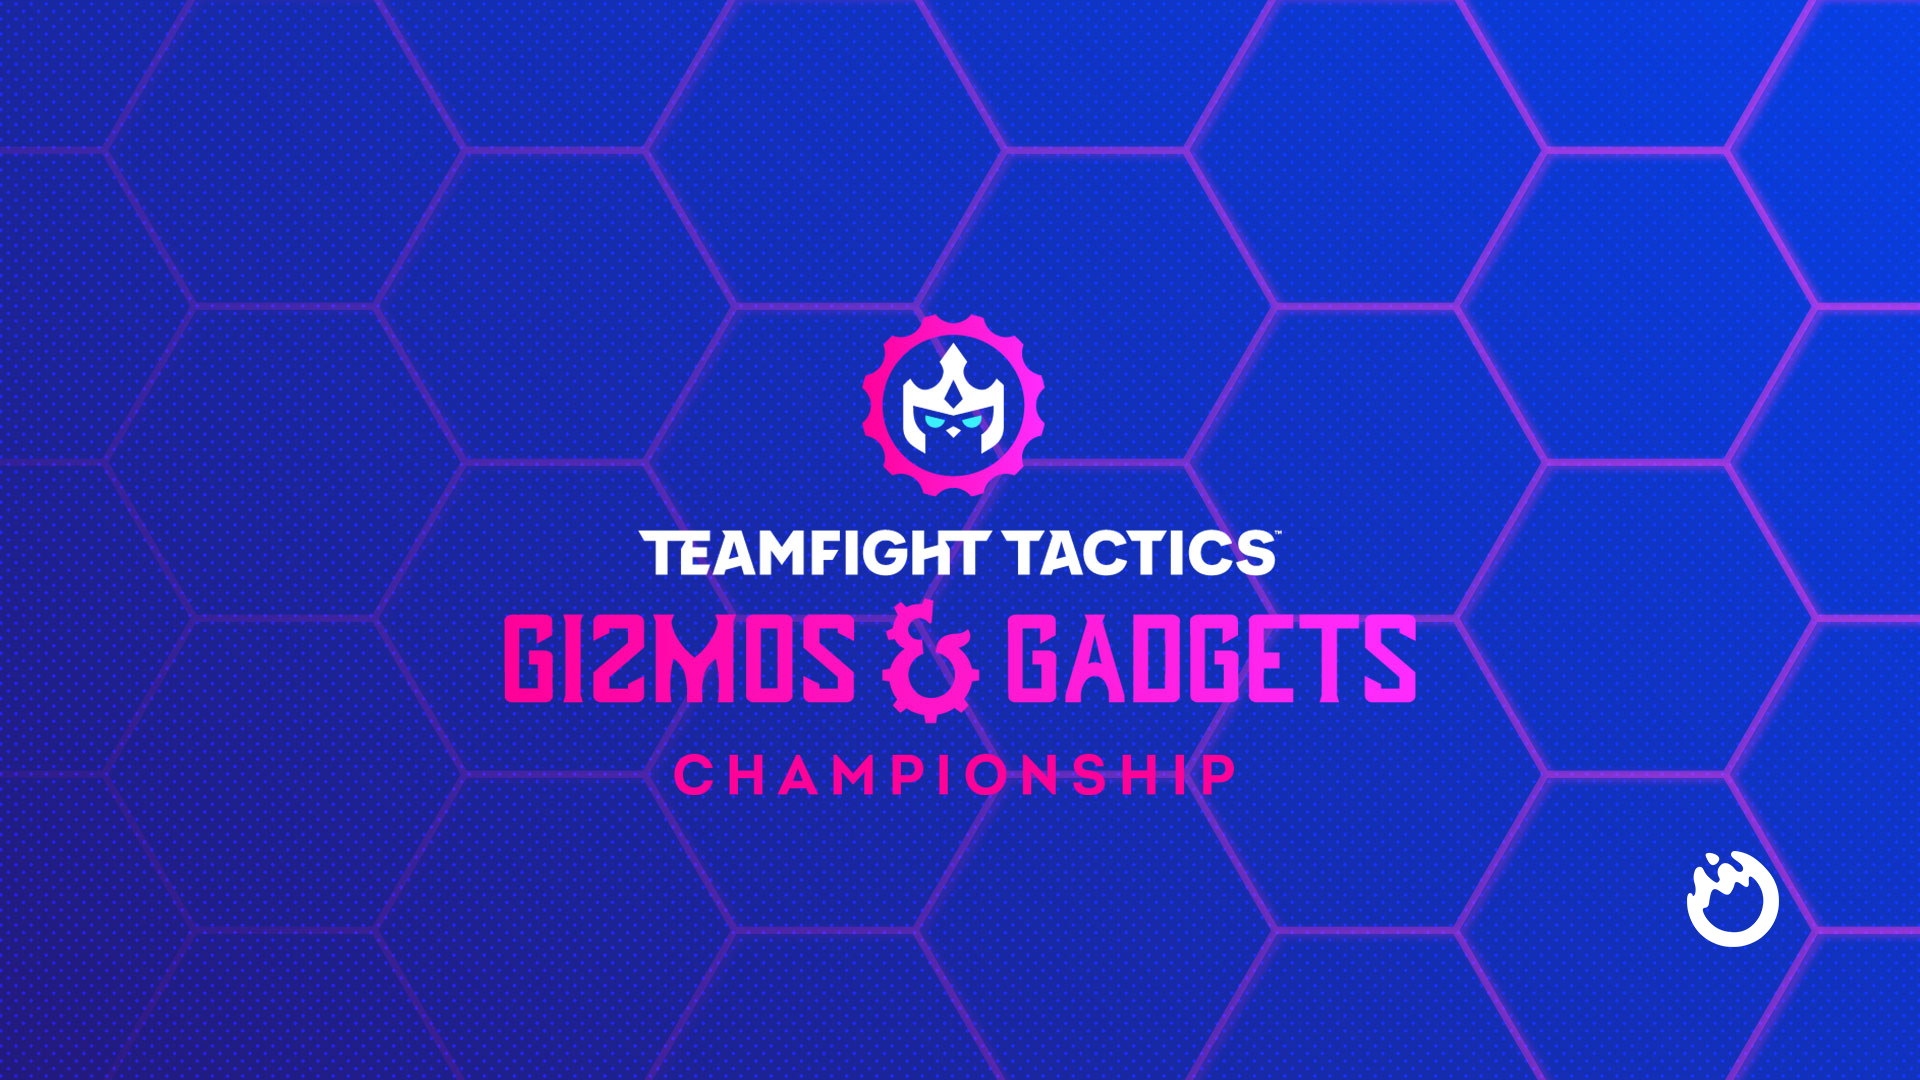 Oceania gains second TFT Worlds slot ahead of Gizmos & Gadgets Championship